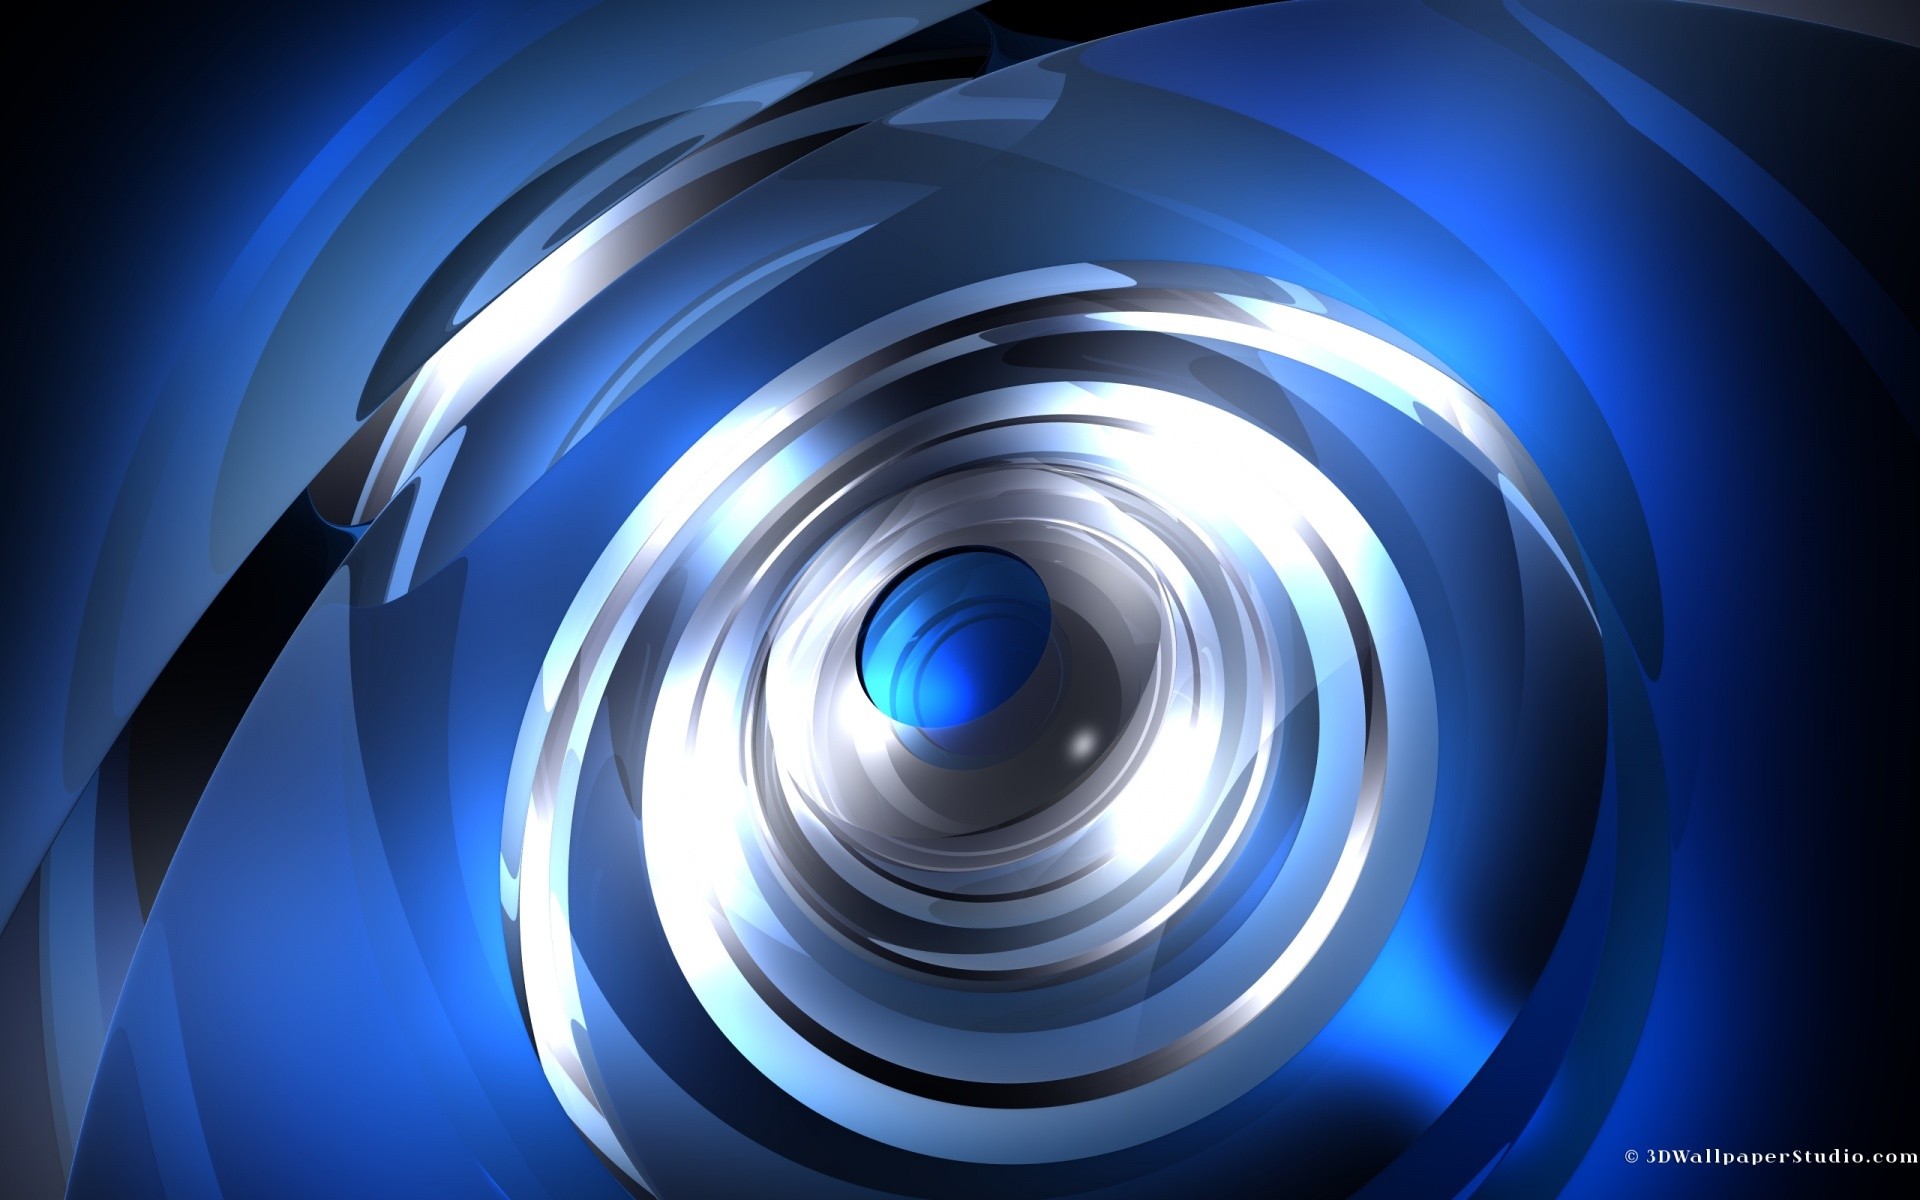 1920x1200 3D Wallpaper: Moving blue 3d abstract 1920 x 1200